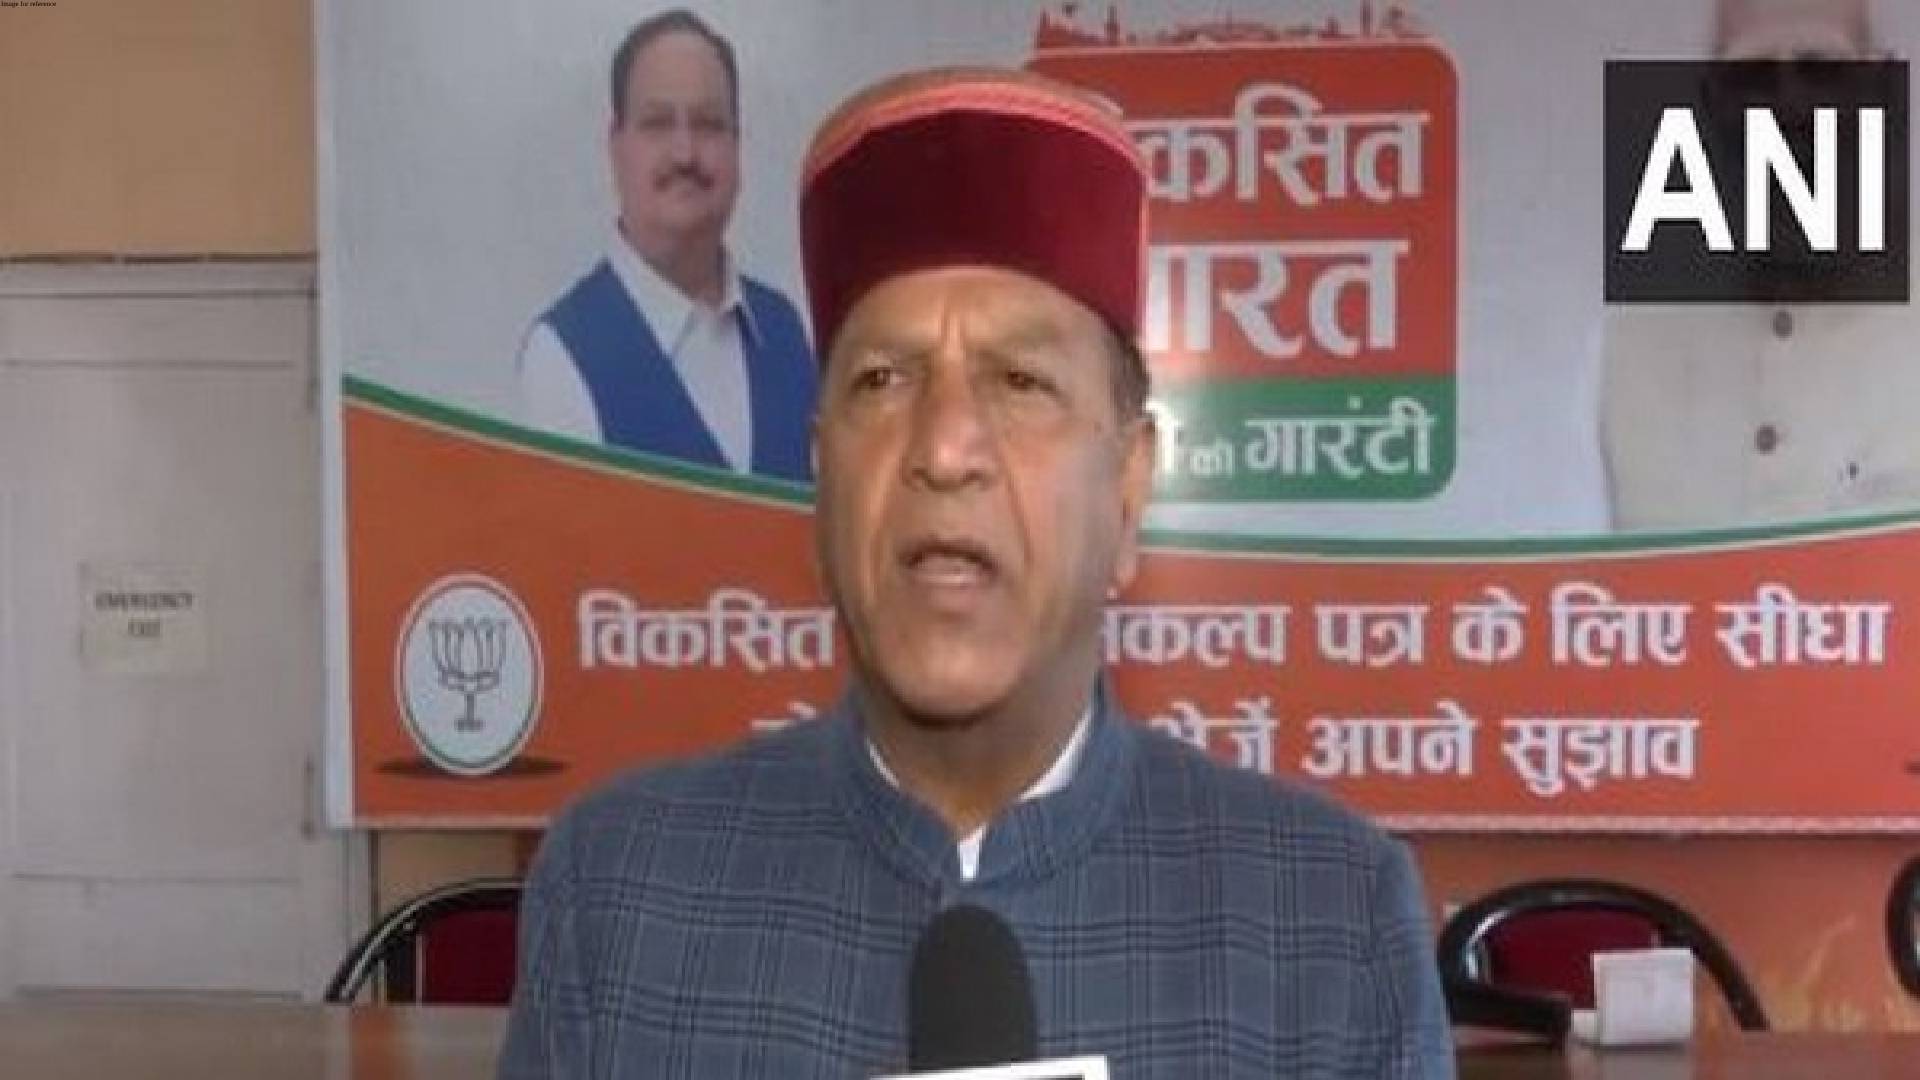 Congress has no right to stay in power: Himachal BJP state president Rajeev Bindal